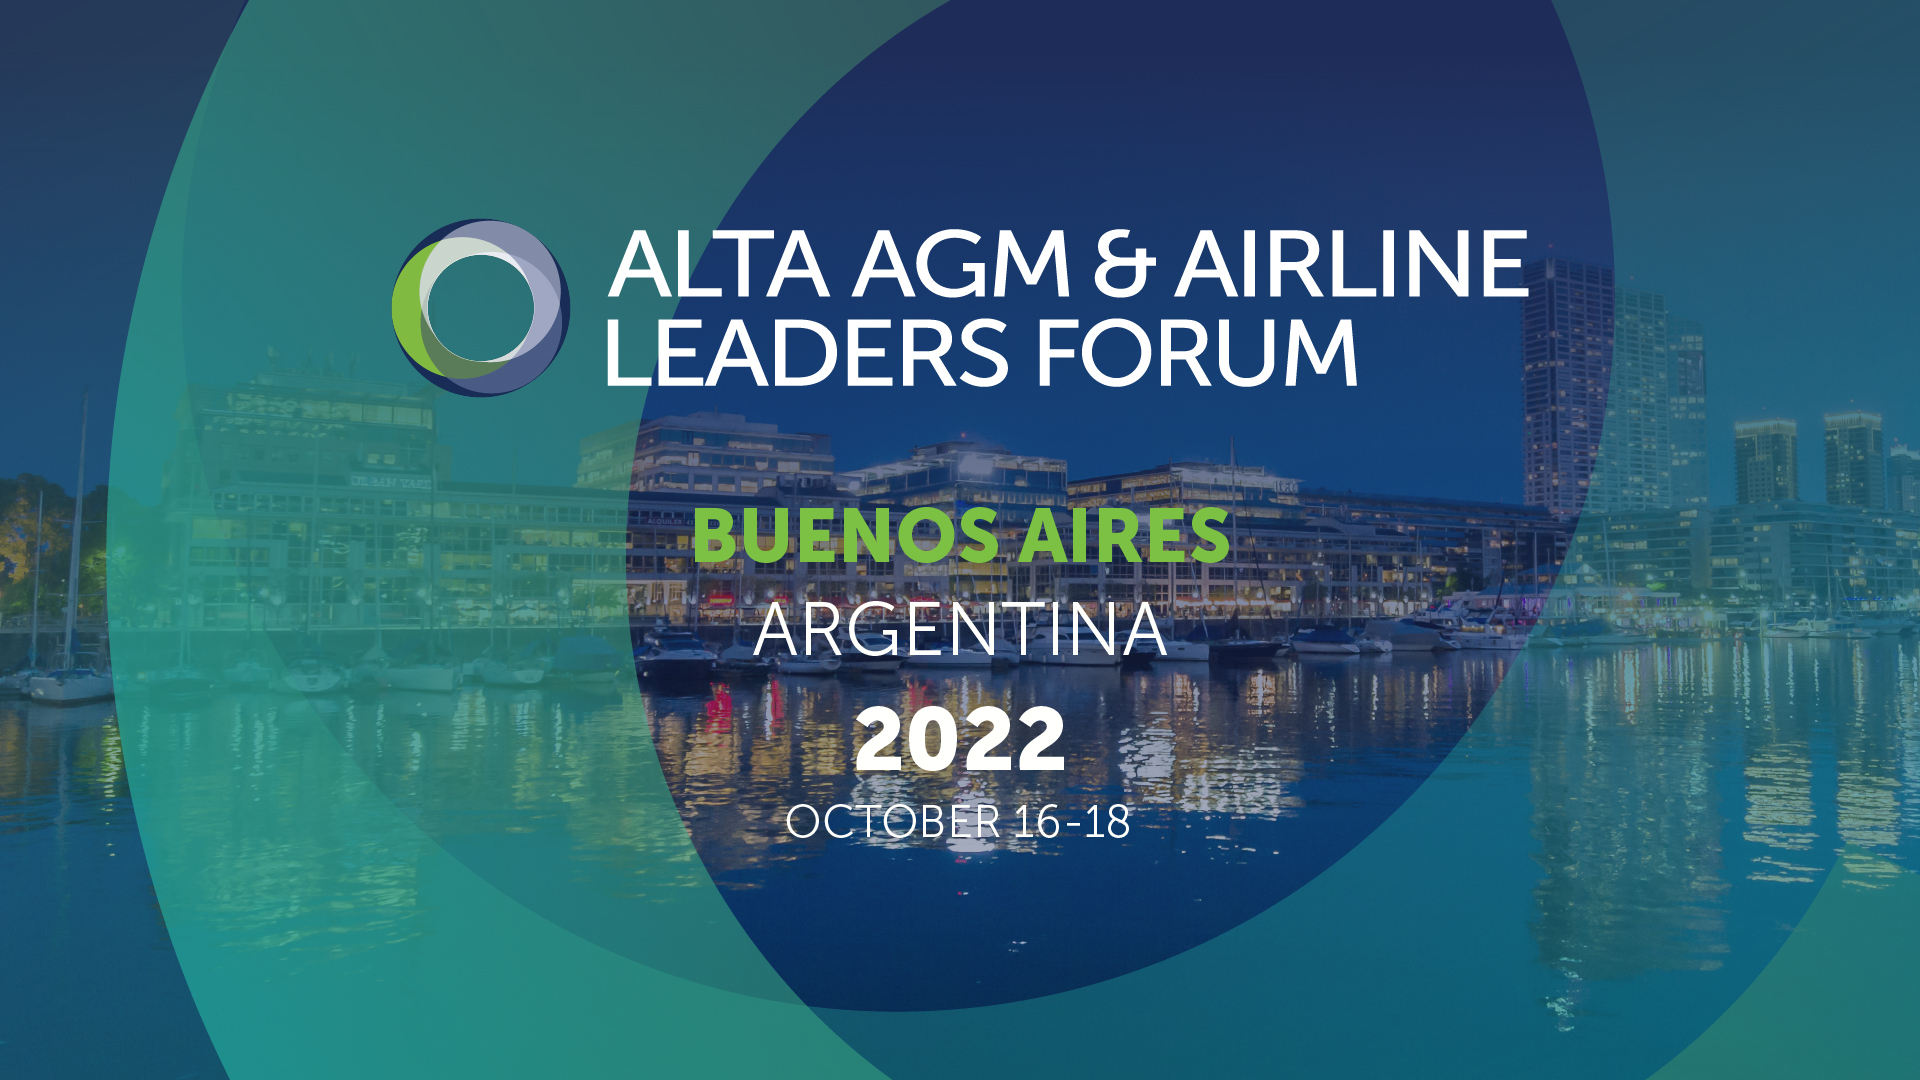 ALTA NEWS - Argentina hosts Latin American and Caribbean aviation leaders at ALTA AGM & Airline Leaders Forum